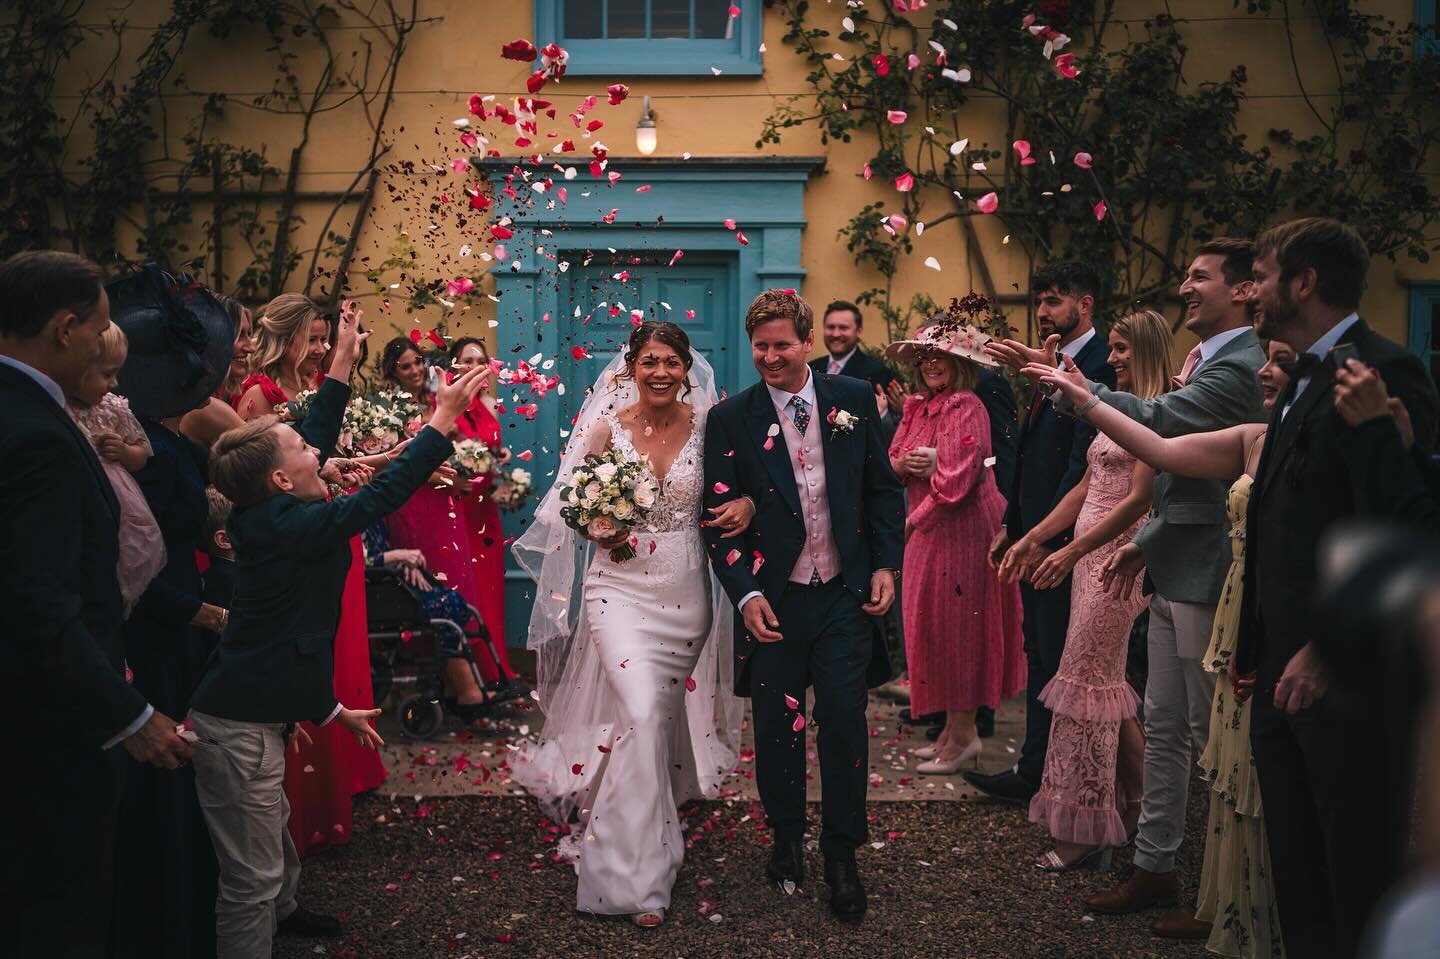 The iconic @southfarm1 yellow and blue house 🤝 colourful confetti shots 👀
Swipe to the last 3 pics for the guests of honour 🙌🏼

#southfarm #southfarmwedding #weddingphotographer #cambridgeweddingphotographer #essexweddingphotographer #essexweddin